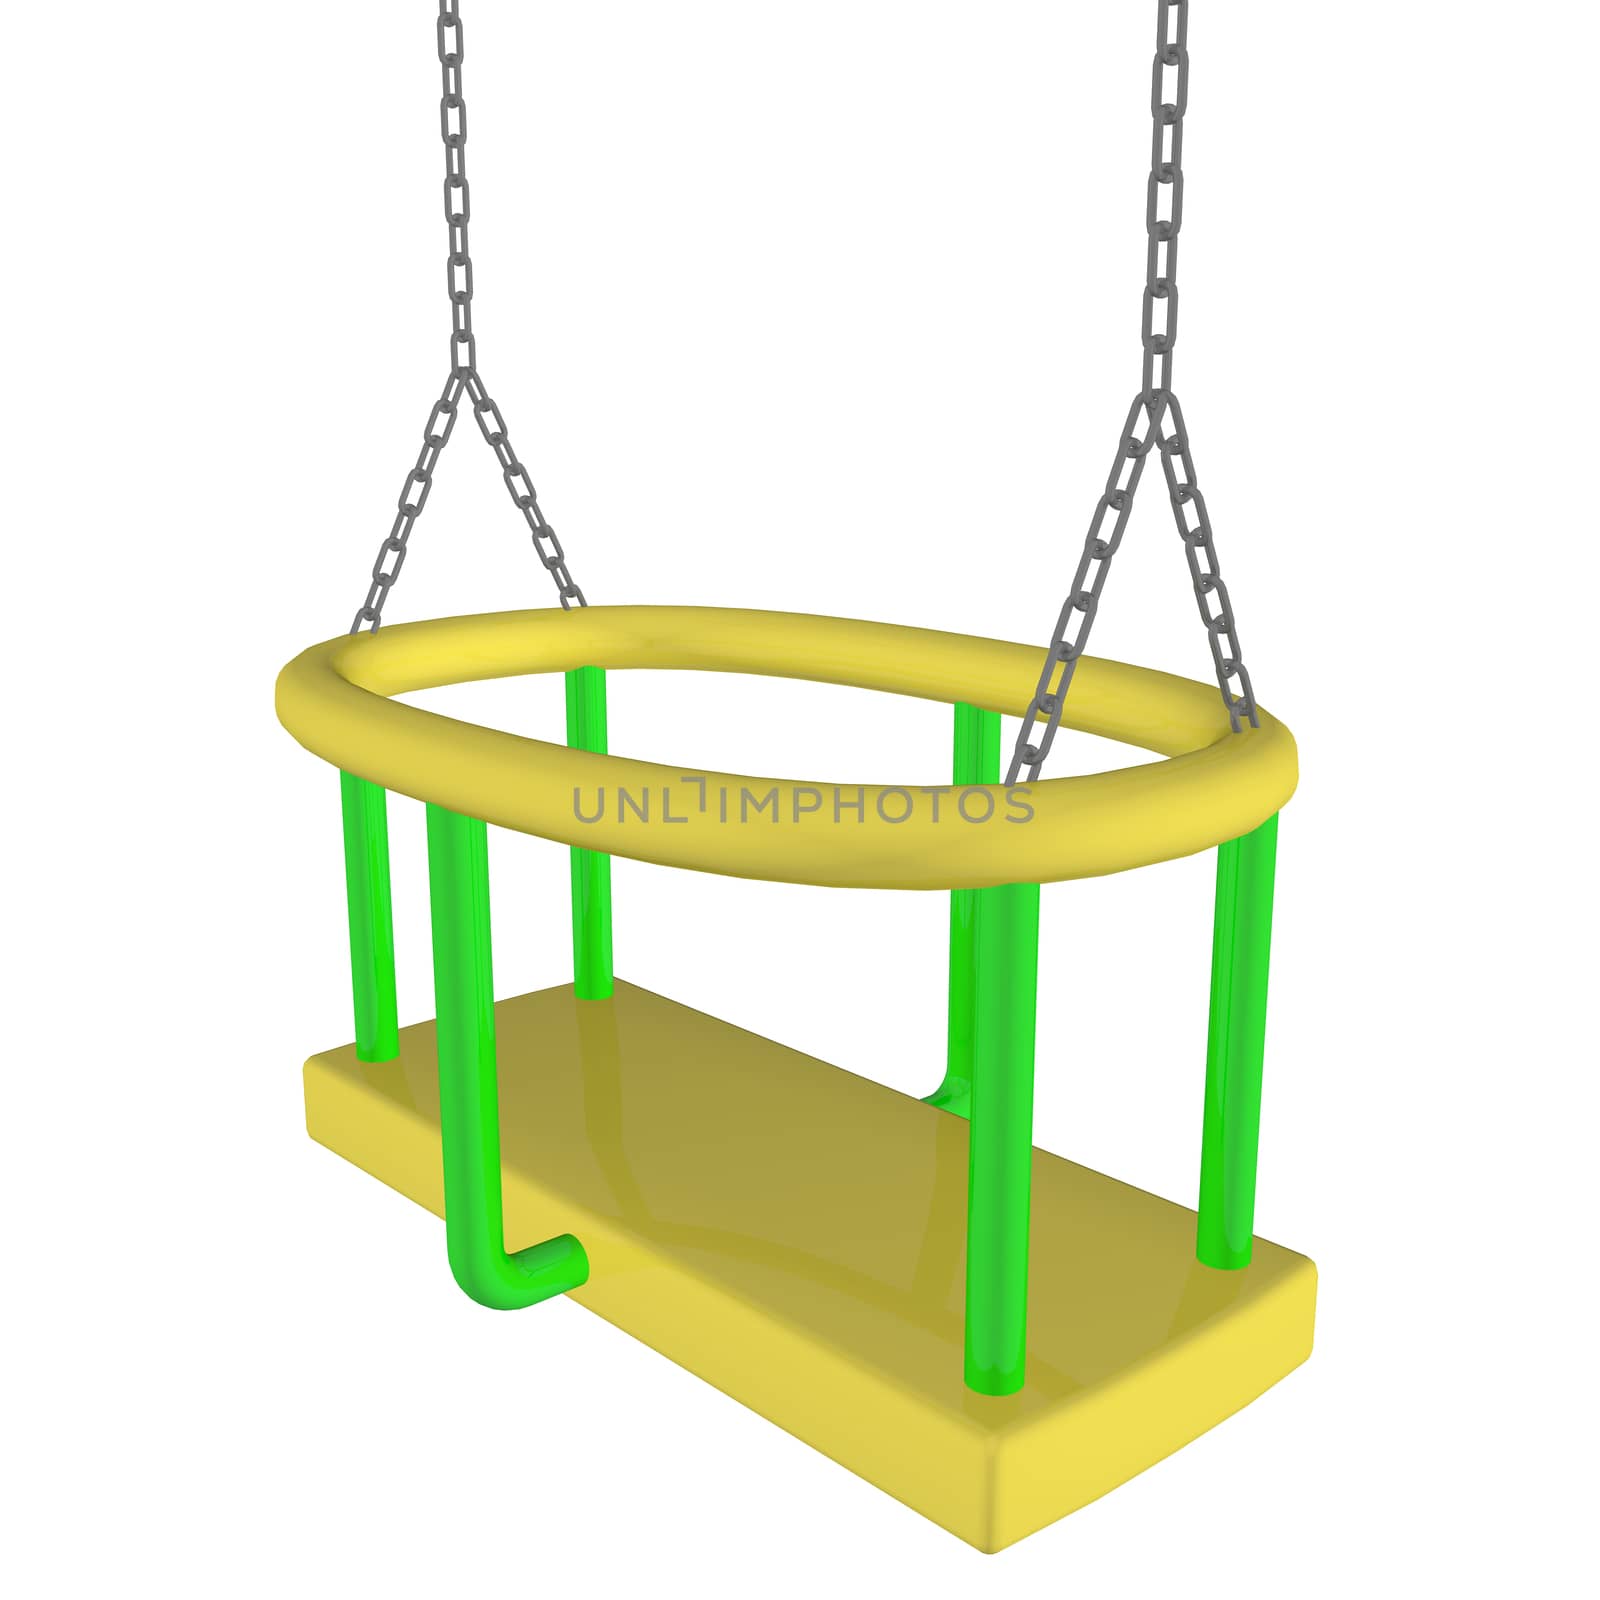 Child-safe swing, yellow and green, 3D illustration, isolated against a white background.